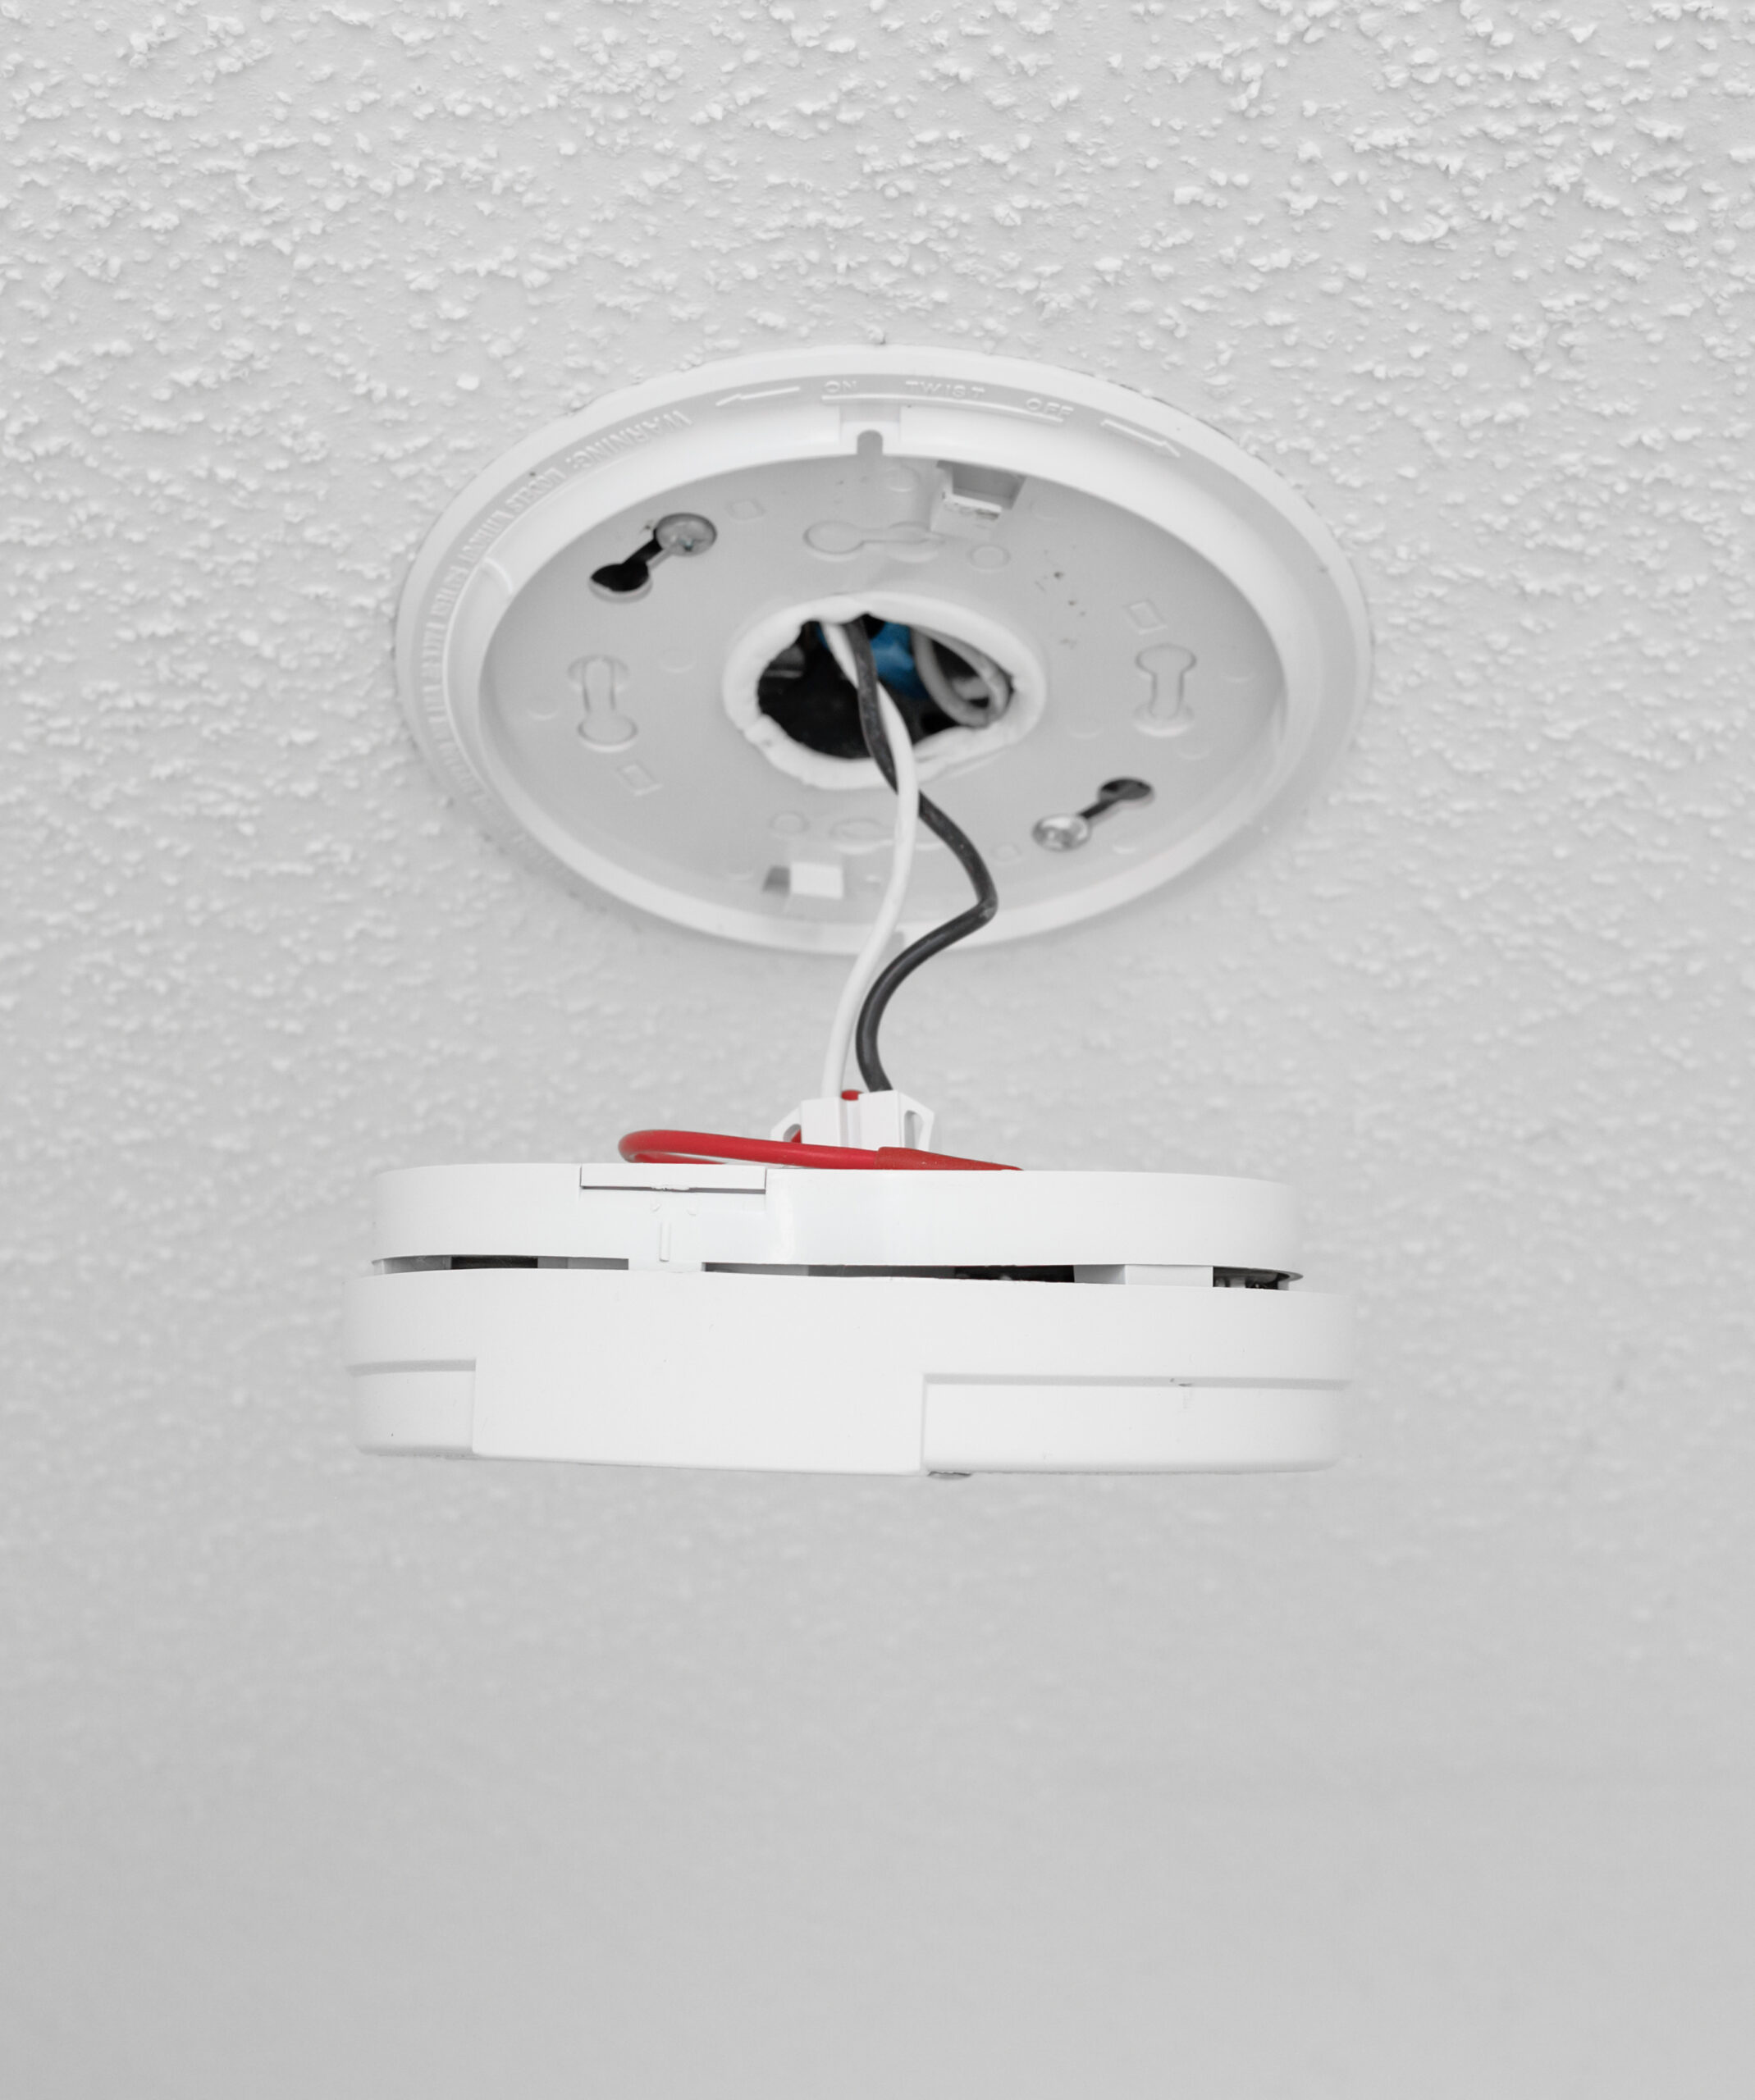 CO Detector Services